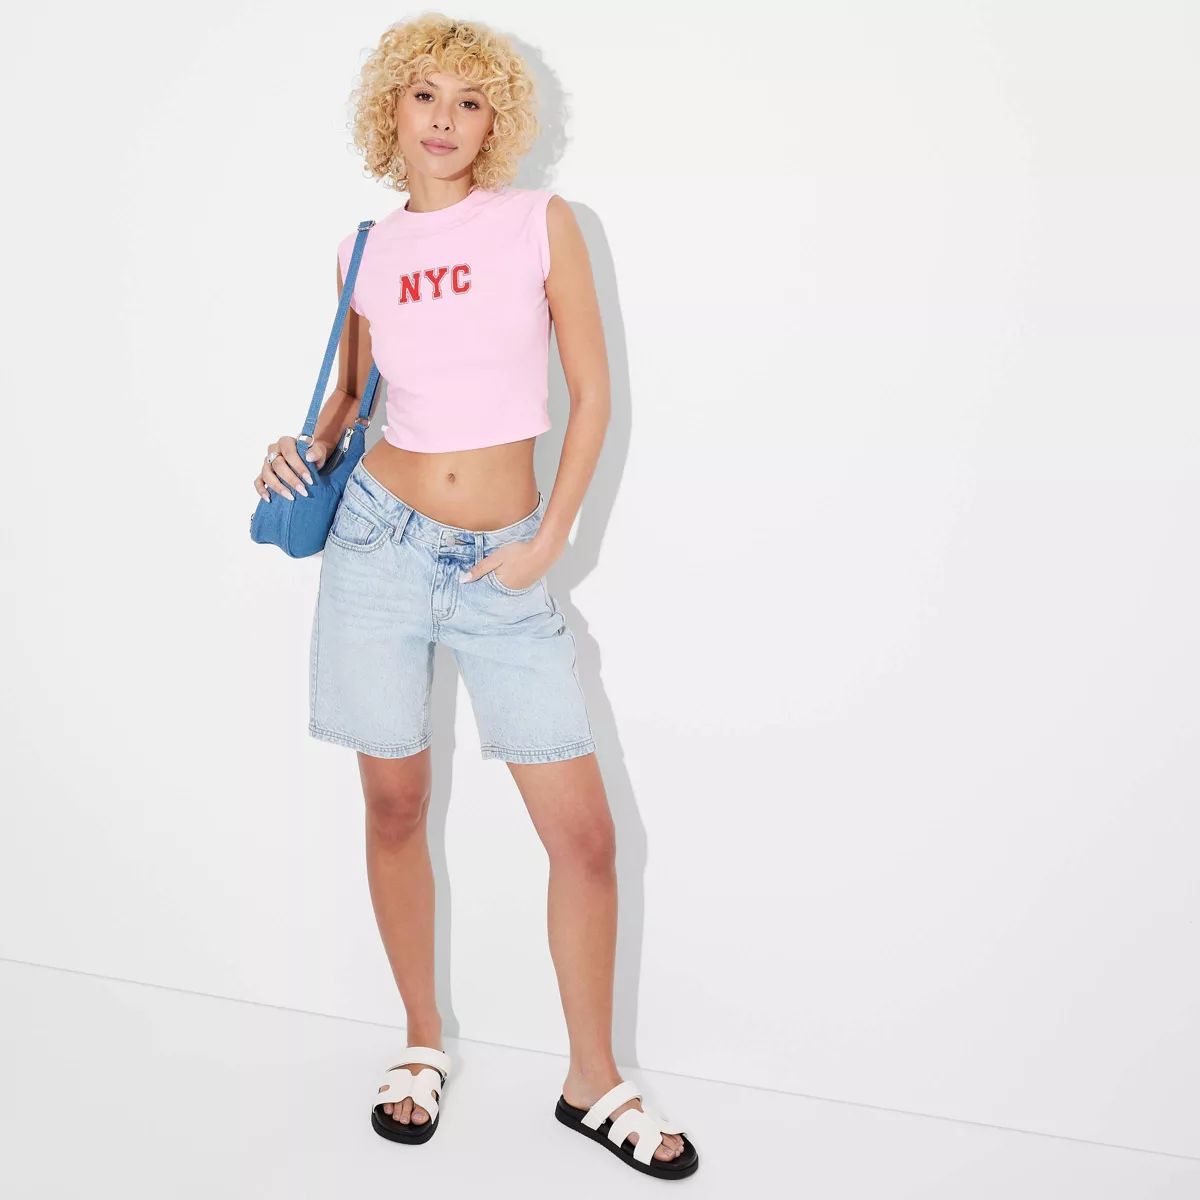 TargetClothing, Shoes & AccessoriesWomen’s ClothingGraphic Tees | Target